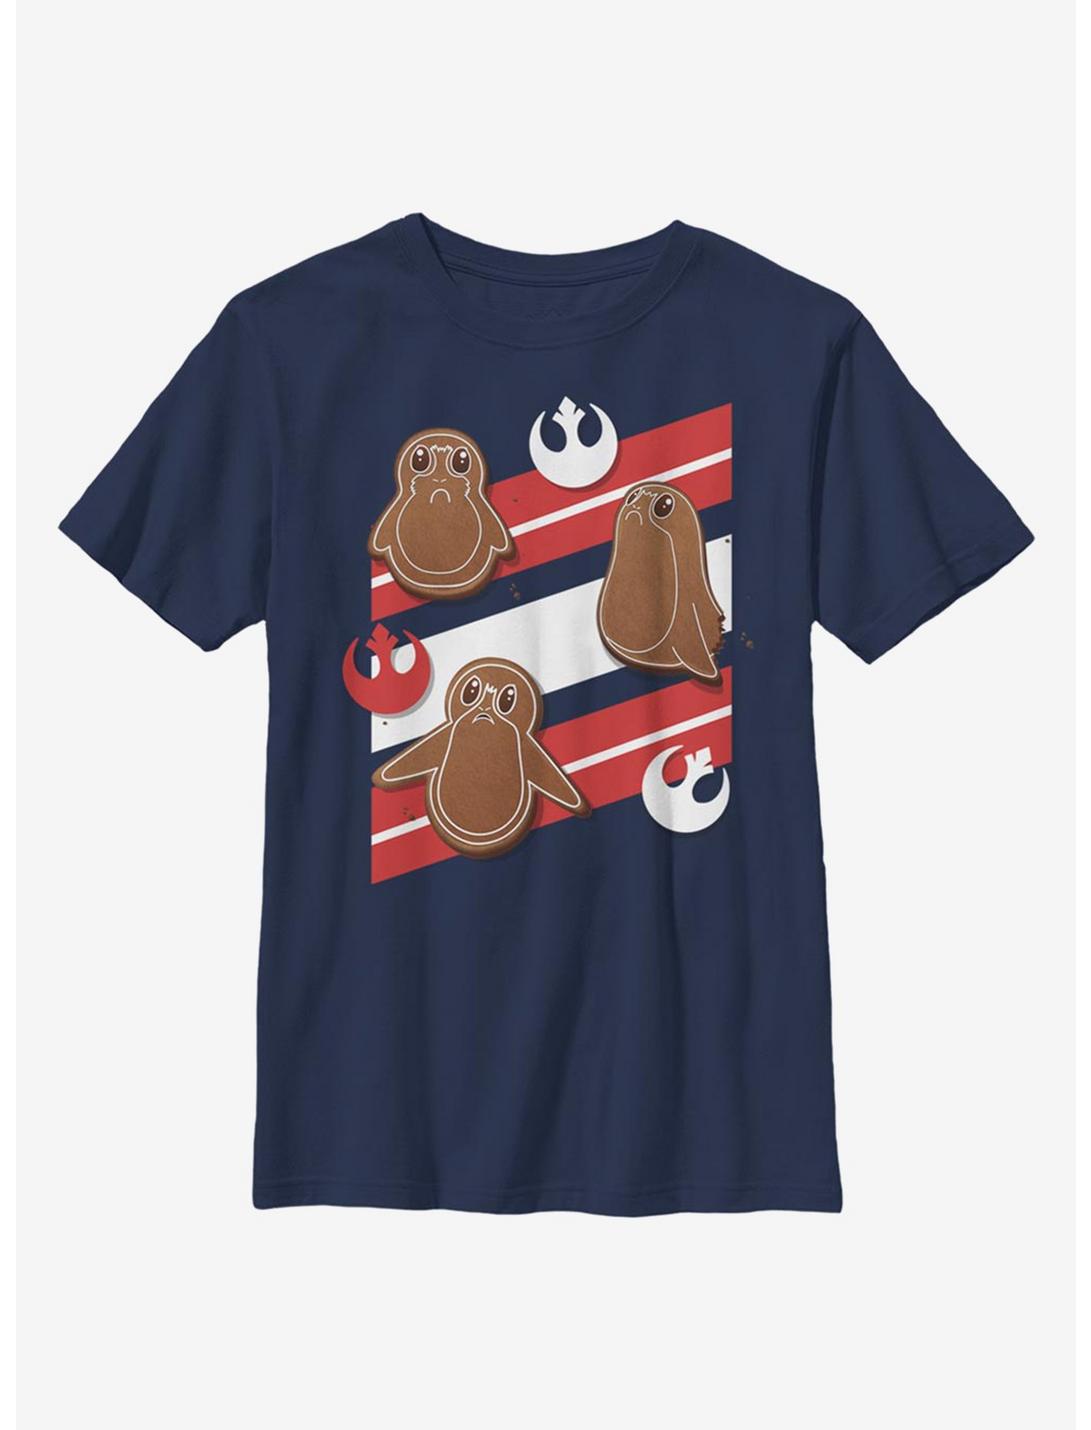 Star Wars Episode VIII: The Last Jedi Ginger Porgs Youth T-Shirt, NAVY, hi-res